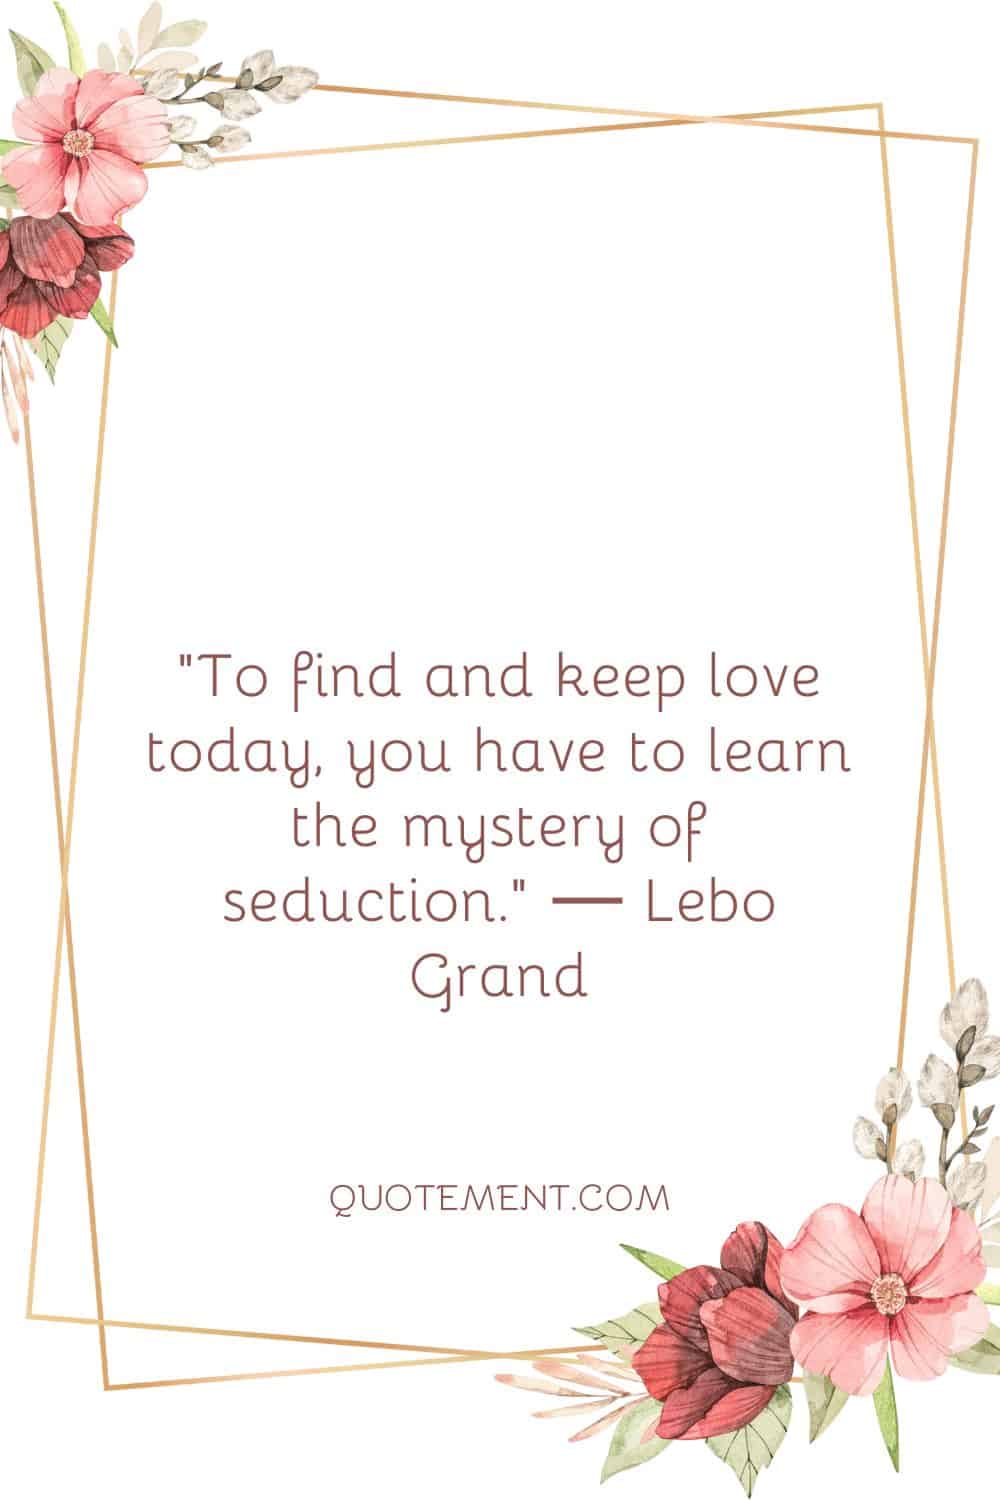 To find and keep love today, you have to learn the mystery of seduction